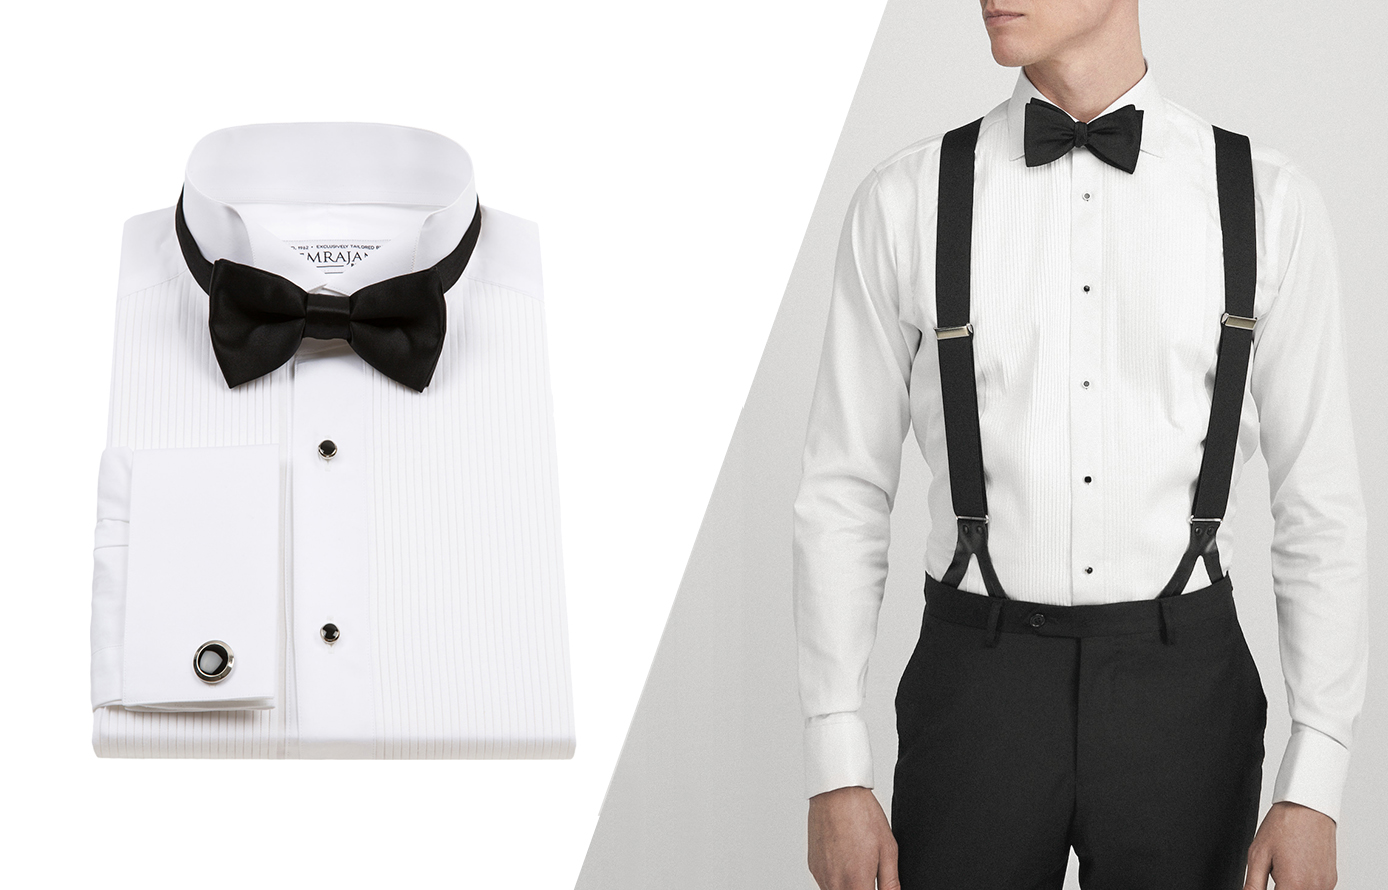 how to wear suspenders with tuxedo shirt